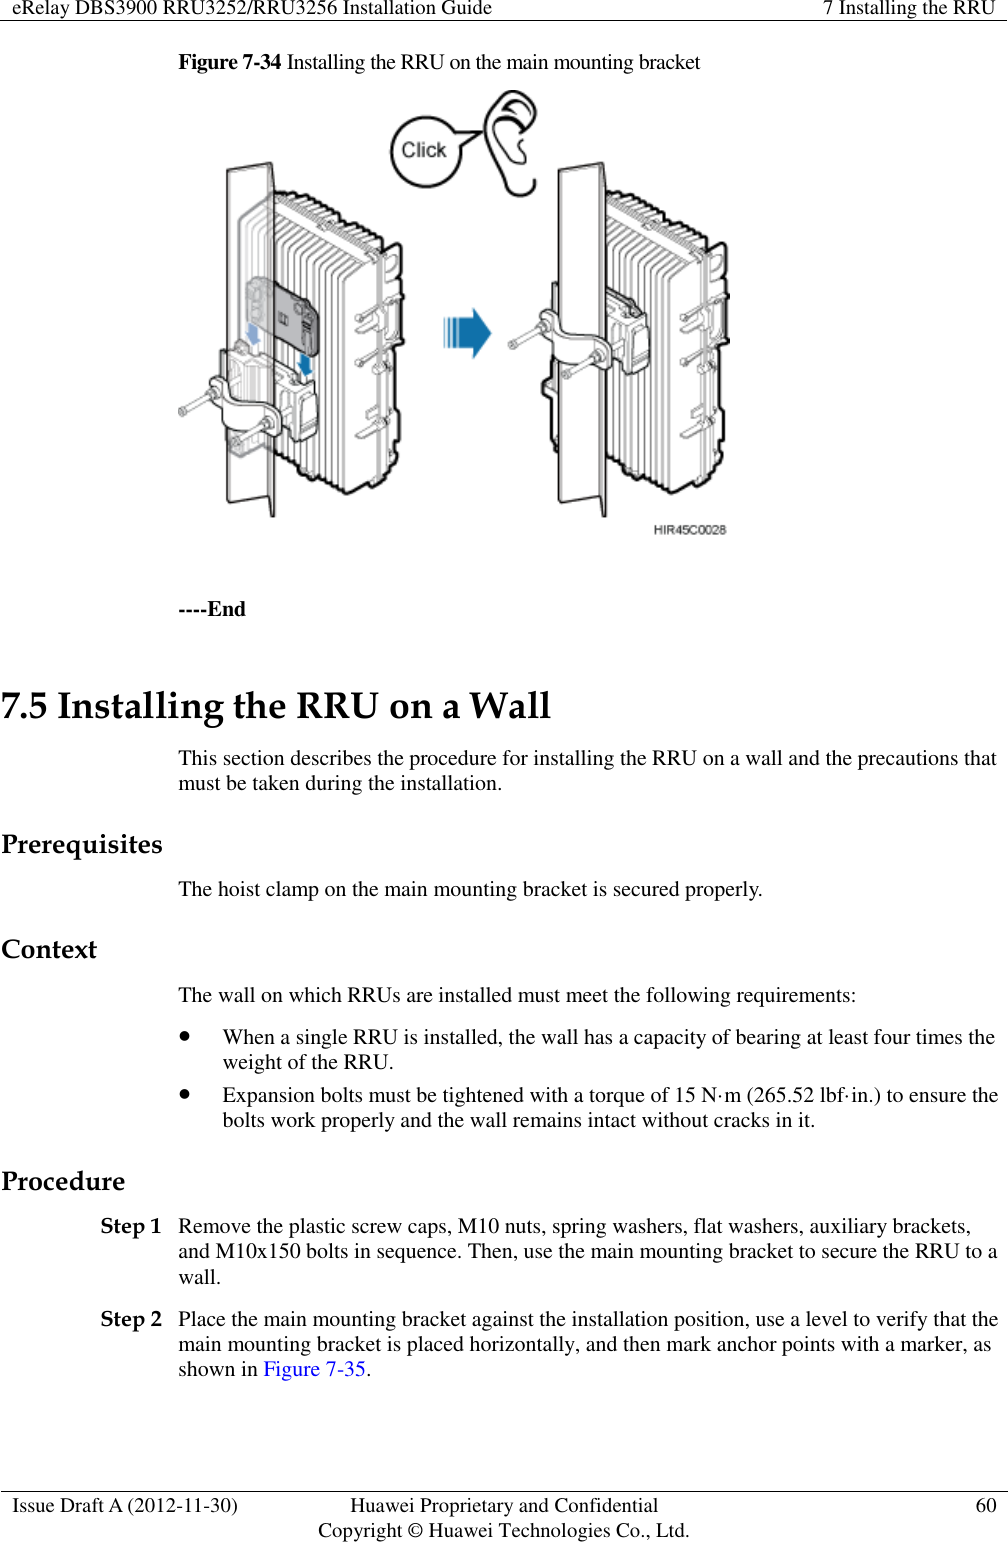 eRelay DBS3900 RRU3252/RRU3256 Installation Guide 7 Installing the RRU  Issue Draft A (2012-11-30) Huawei Proprietary and Confidential                                     Copyright © Huawei Technologies Co., Ltd. 60  Figure 7-34 Installing the RRU on the main mounting bracket   ----End 7.5 Installing the RRU on a Wall This section describes the procedure for installing the RRU on a wall and the precautions that must be taken during the installation. Prerequisites The hoist clamp on the main mounting bracket is secured properly. Context The wall on which RRUs are installed must meet the following requirements:  When a single RRU is installed, the wall has a capacity of bearing at least four times the weight of the RRU.  Expansion bolts must be tightened with a torque of 15 N·m (265.52 lbf·in.) to ensure the bolts work properly and the wall remains intact without cracks in it. Procedure Step 1 Remove the plastic screw caps, M10 nuts, spring washers, flat washers, auxiliary brackets, and M10x150 bolts in sequence. Then, use the main mounting bracket to secure the RRU to a wall.   Step 2 Place the main mounting bracket against the installation position, use a level to verify that the main mounting bracket is placed horizontally, and then mark anchor points with a marker, as shown in Figure 7-35.   